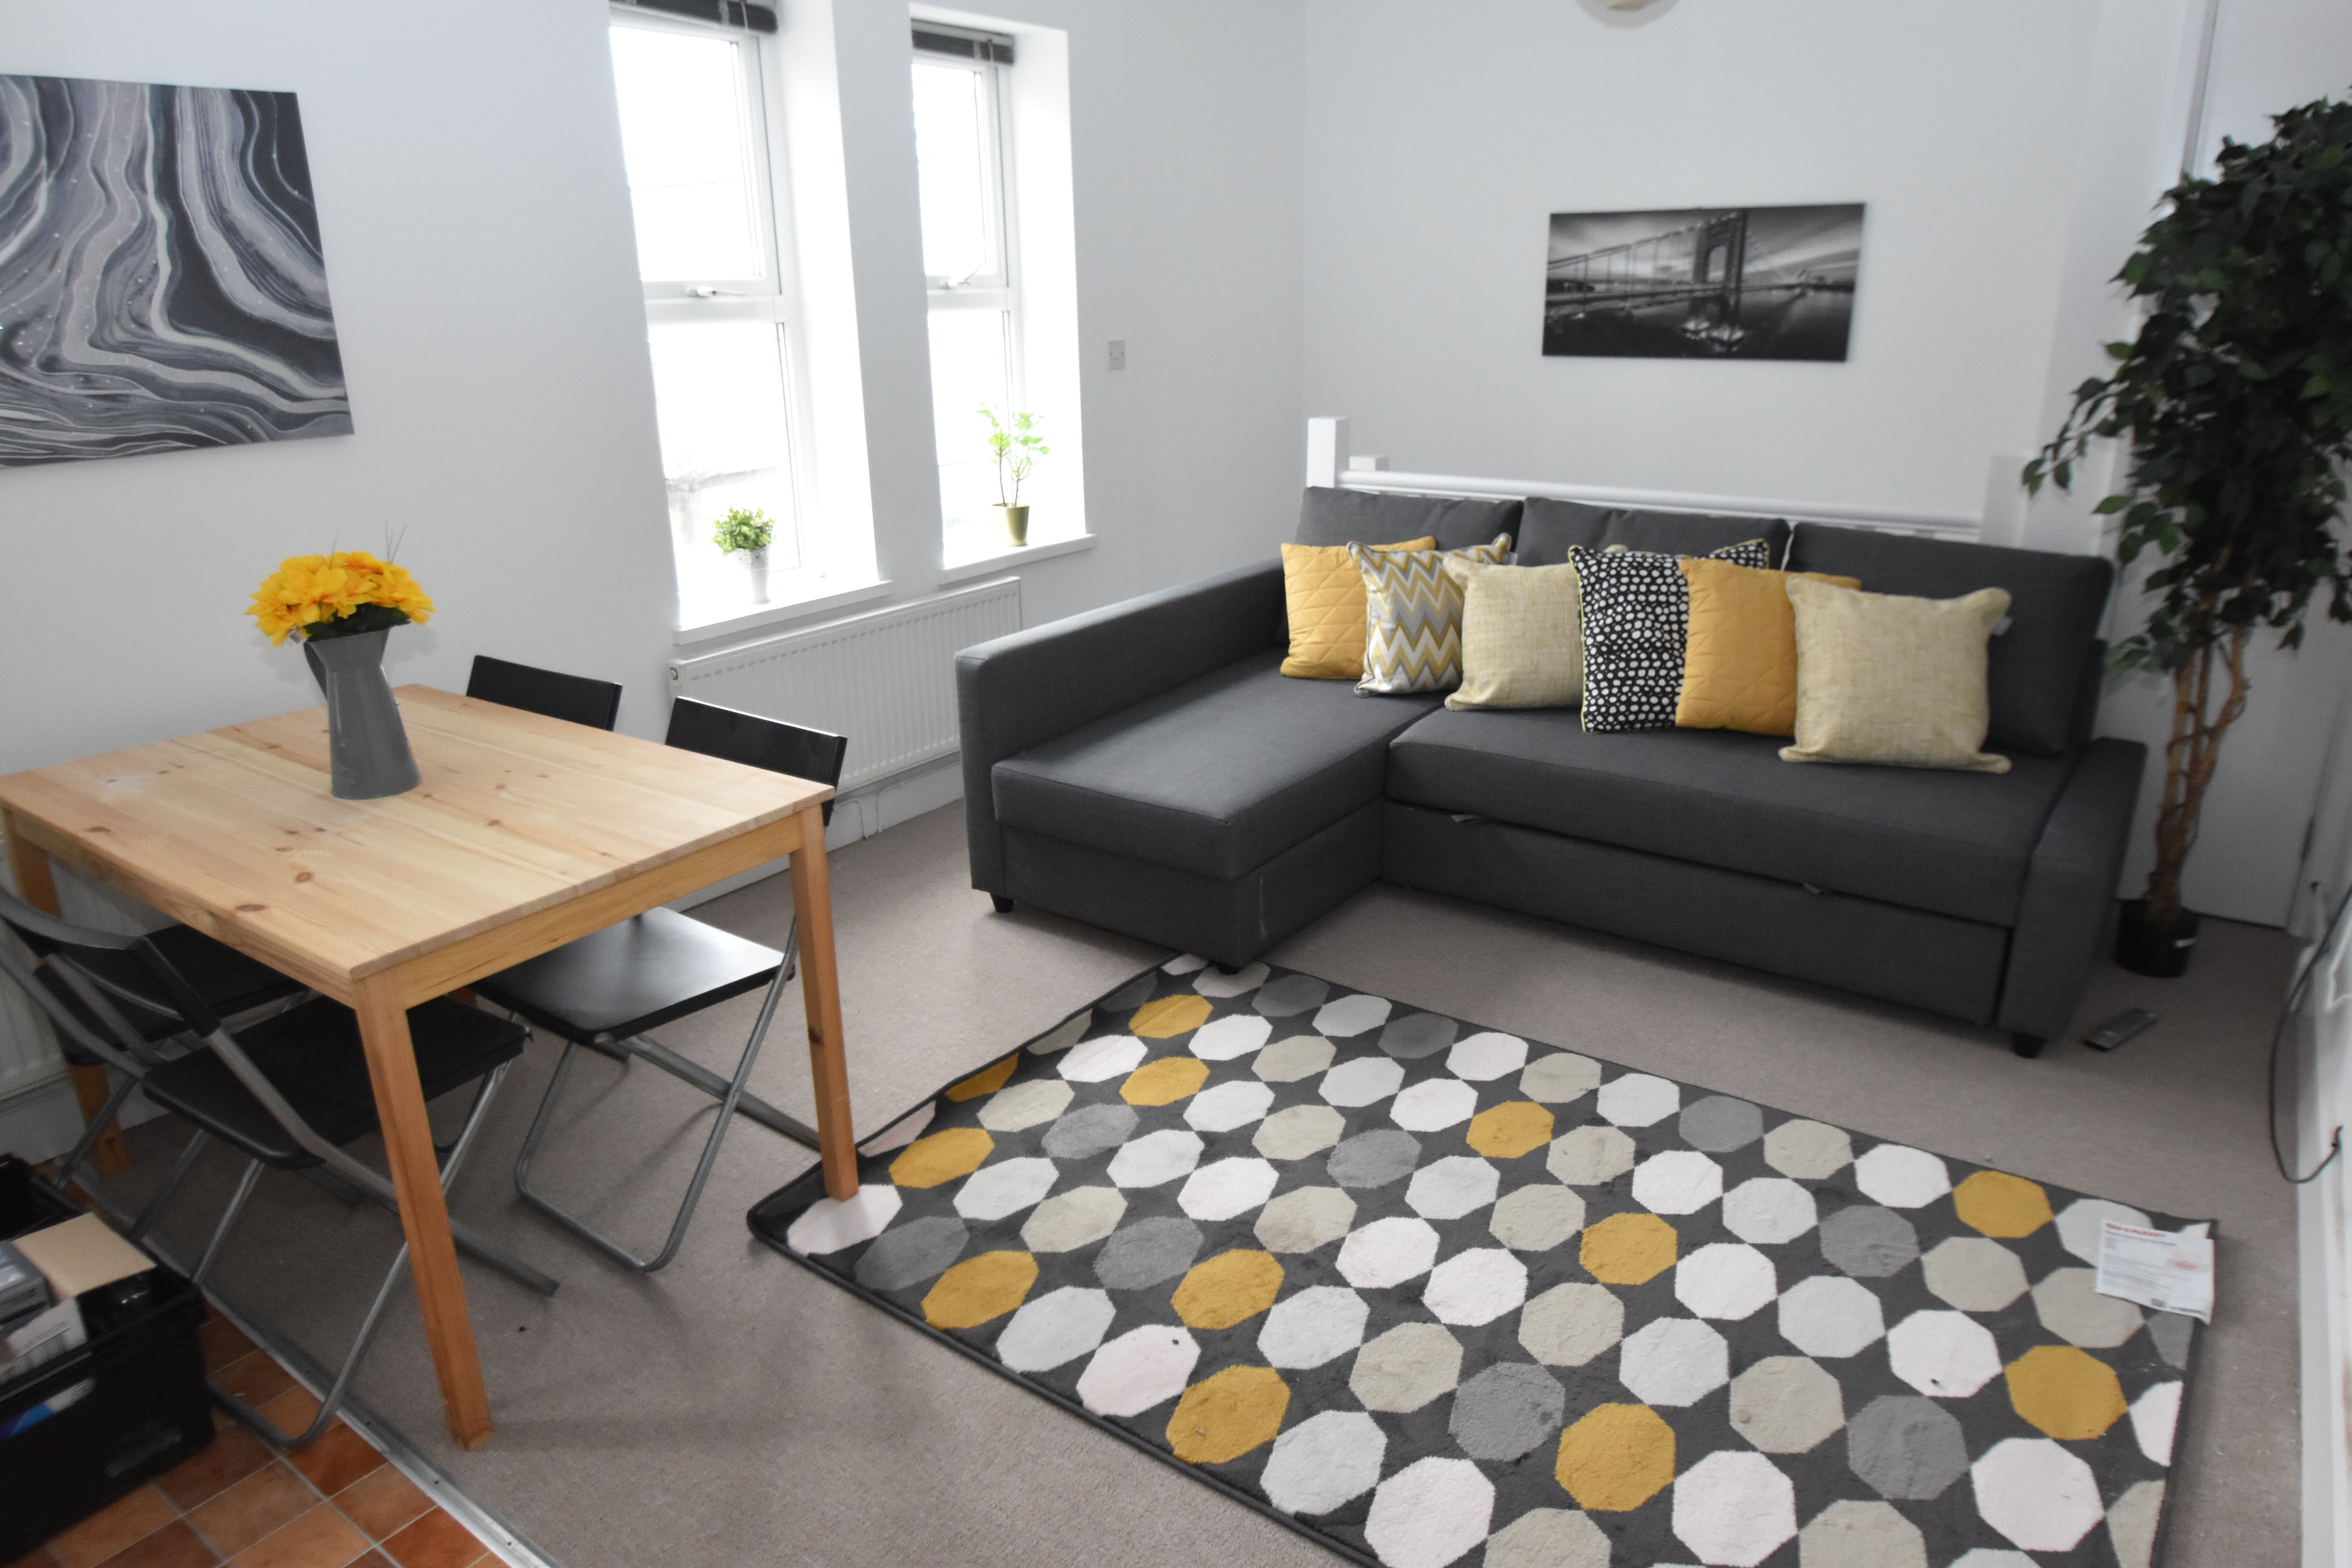 1 bed flat to rent in Woodville road, Cathays - Property Image 1